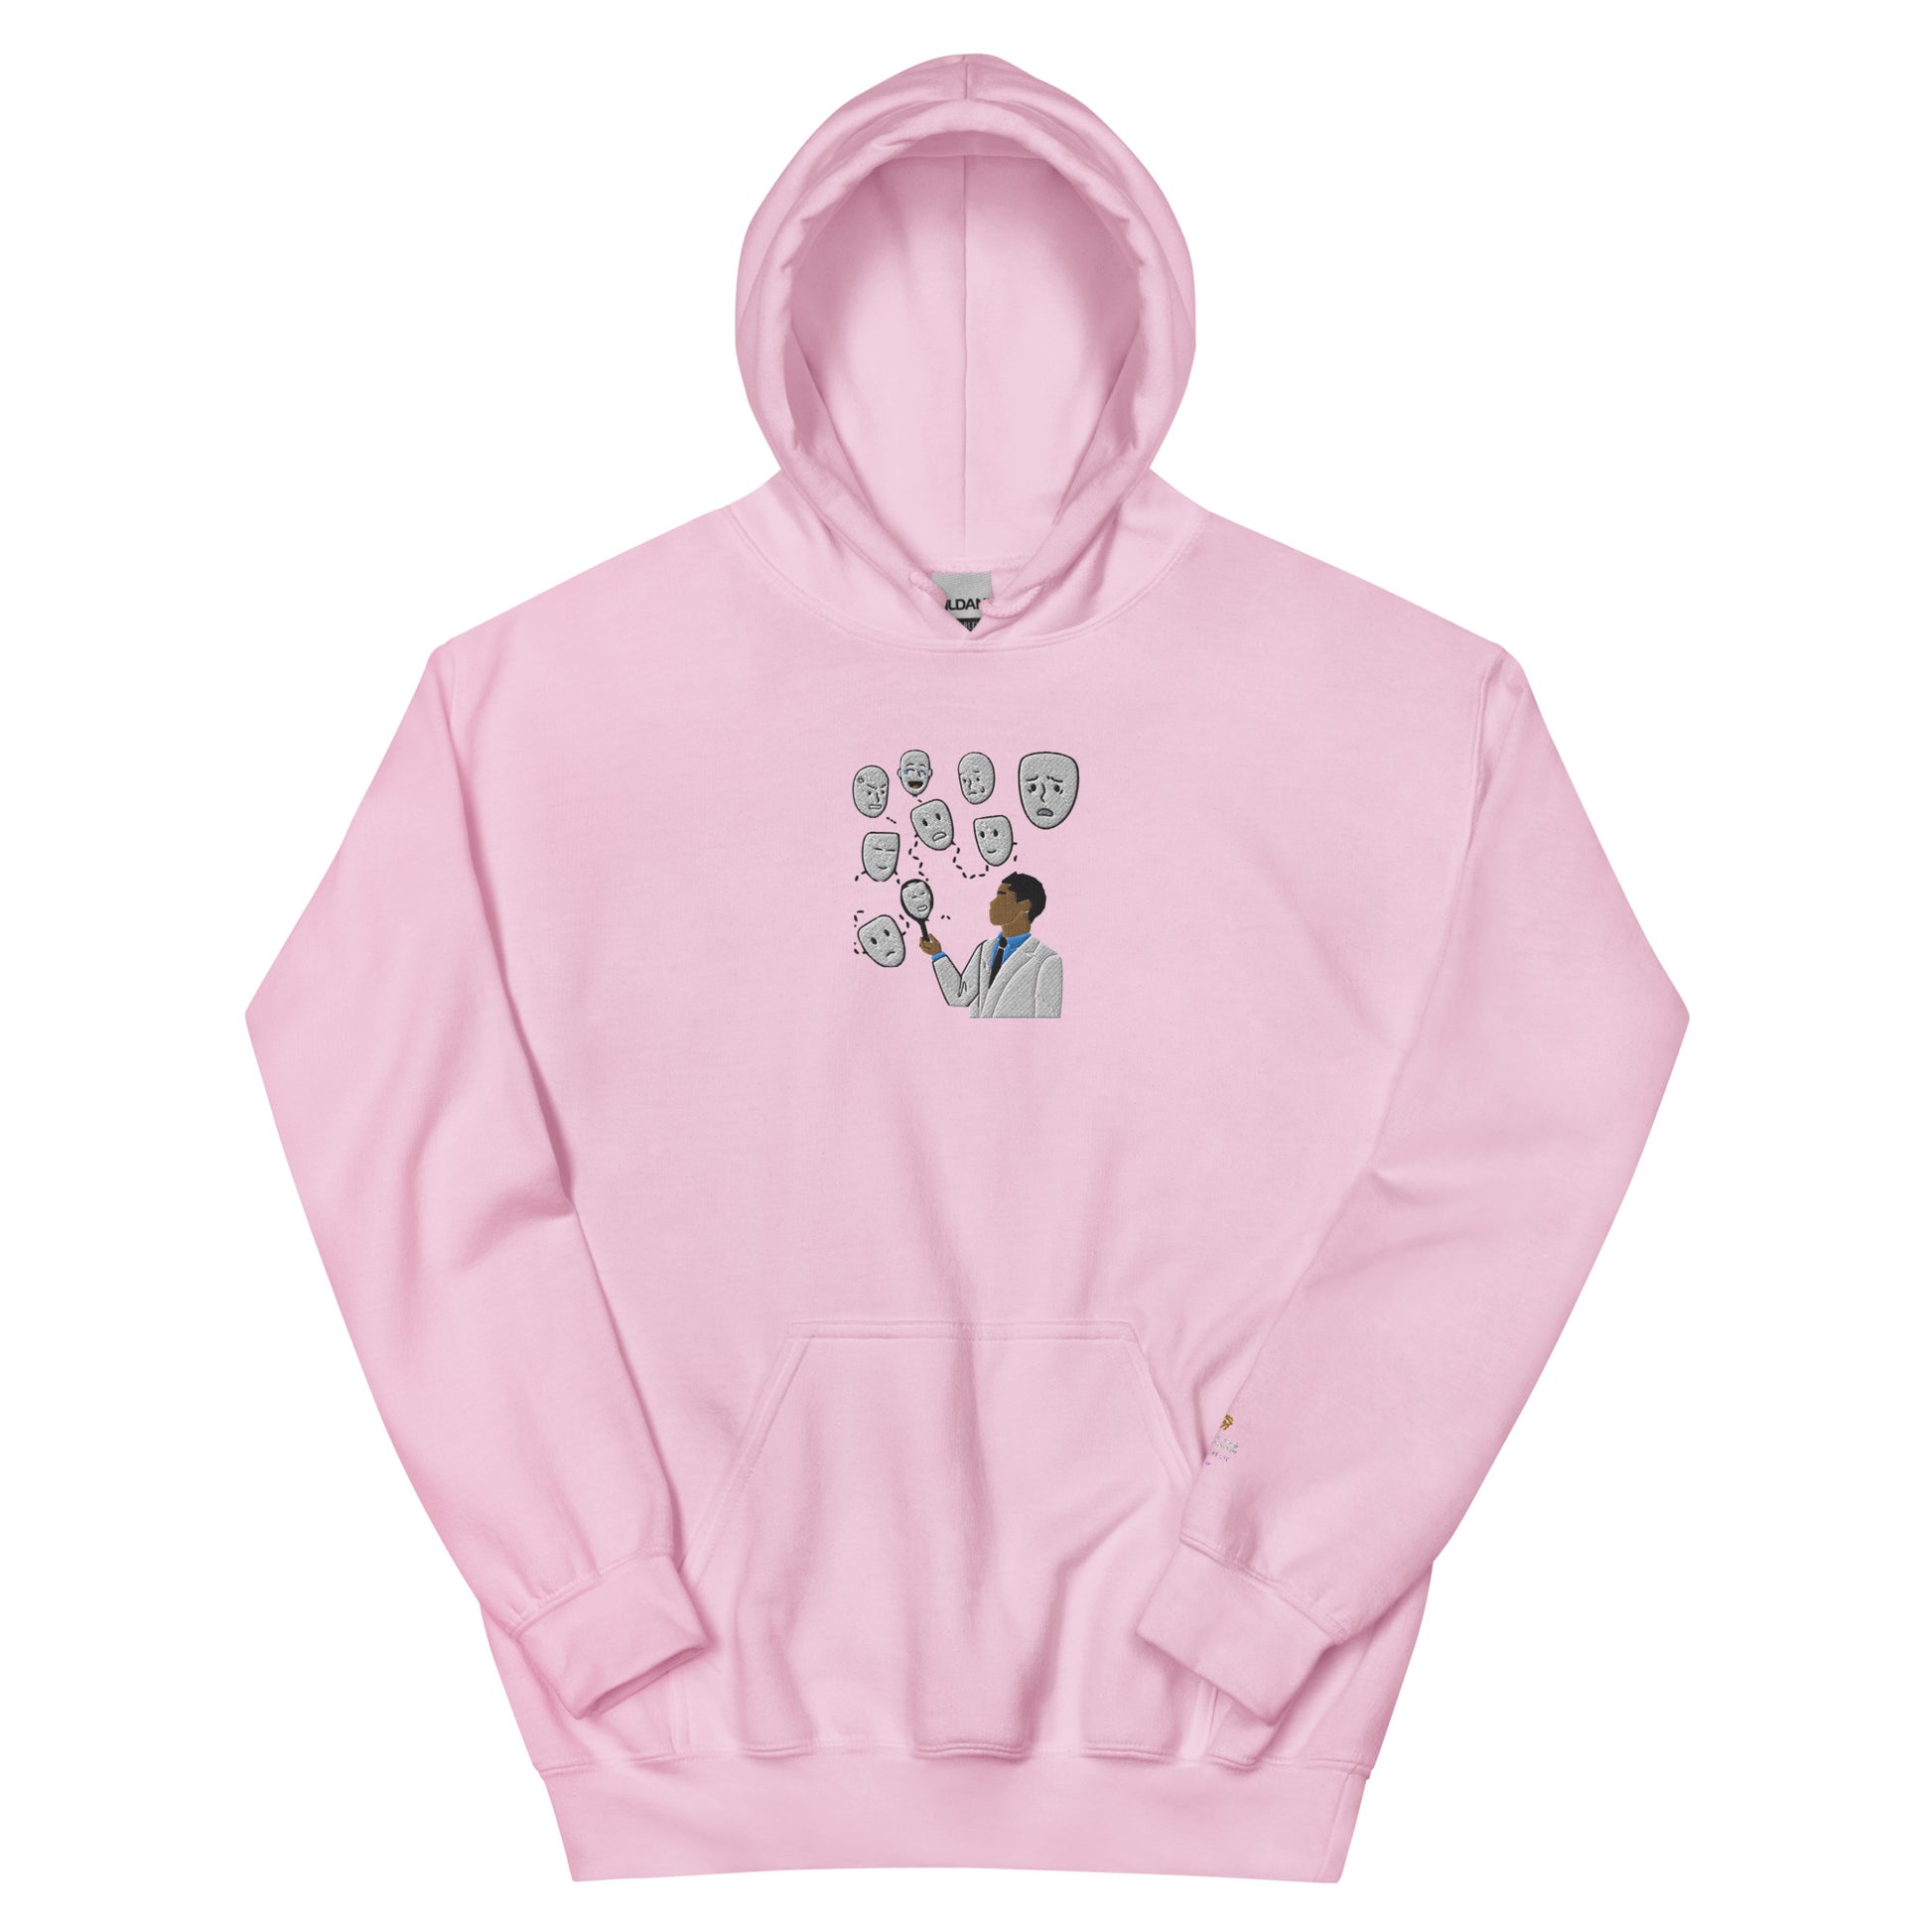 "Emotions Embroidered" Unisex Hoodie - Conscious tees inc.